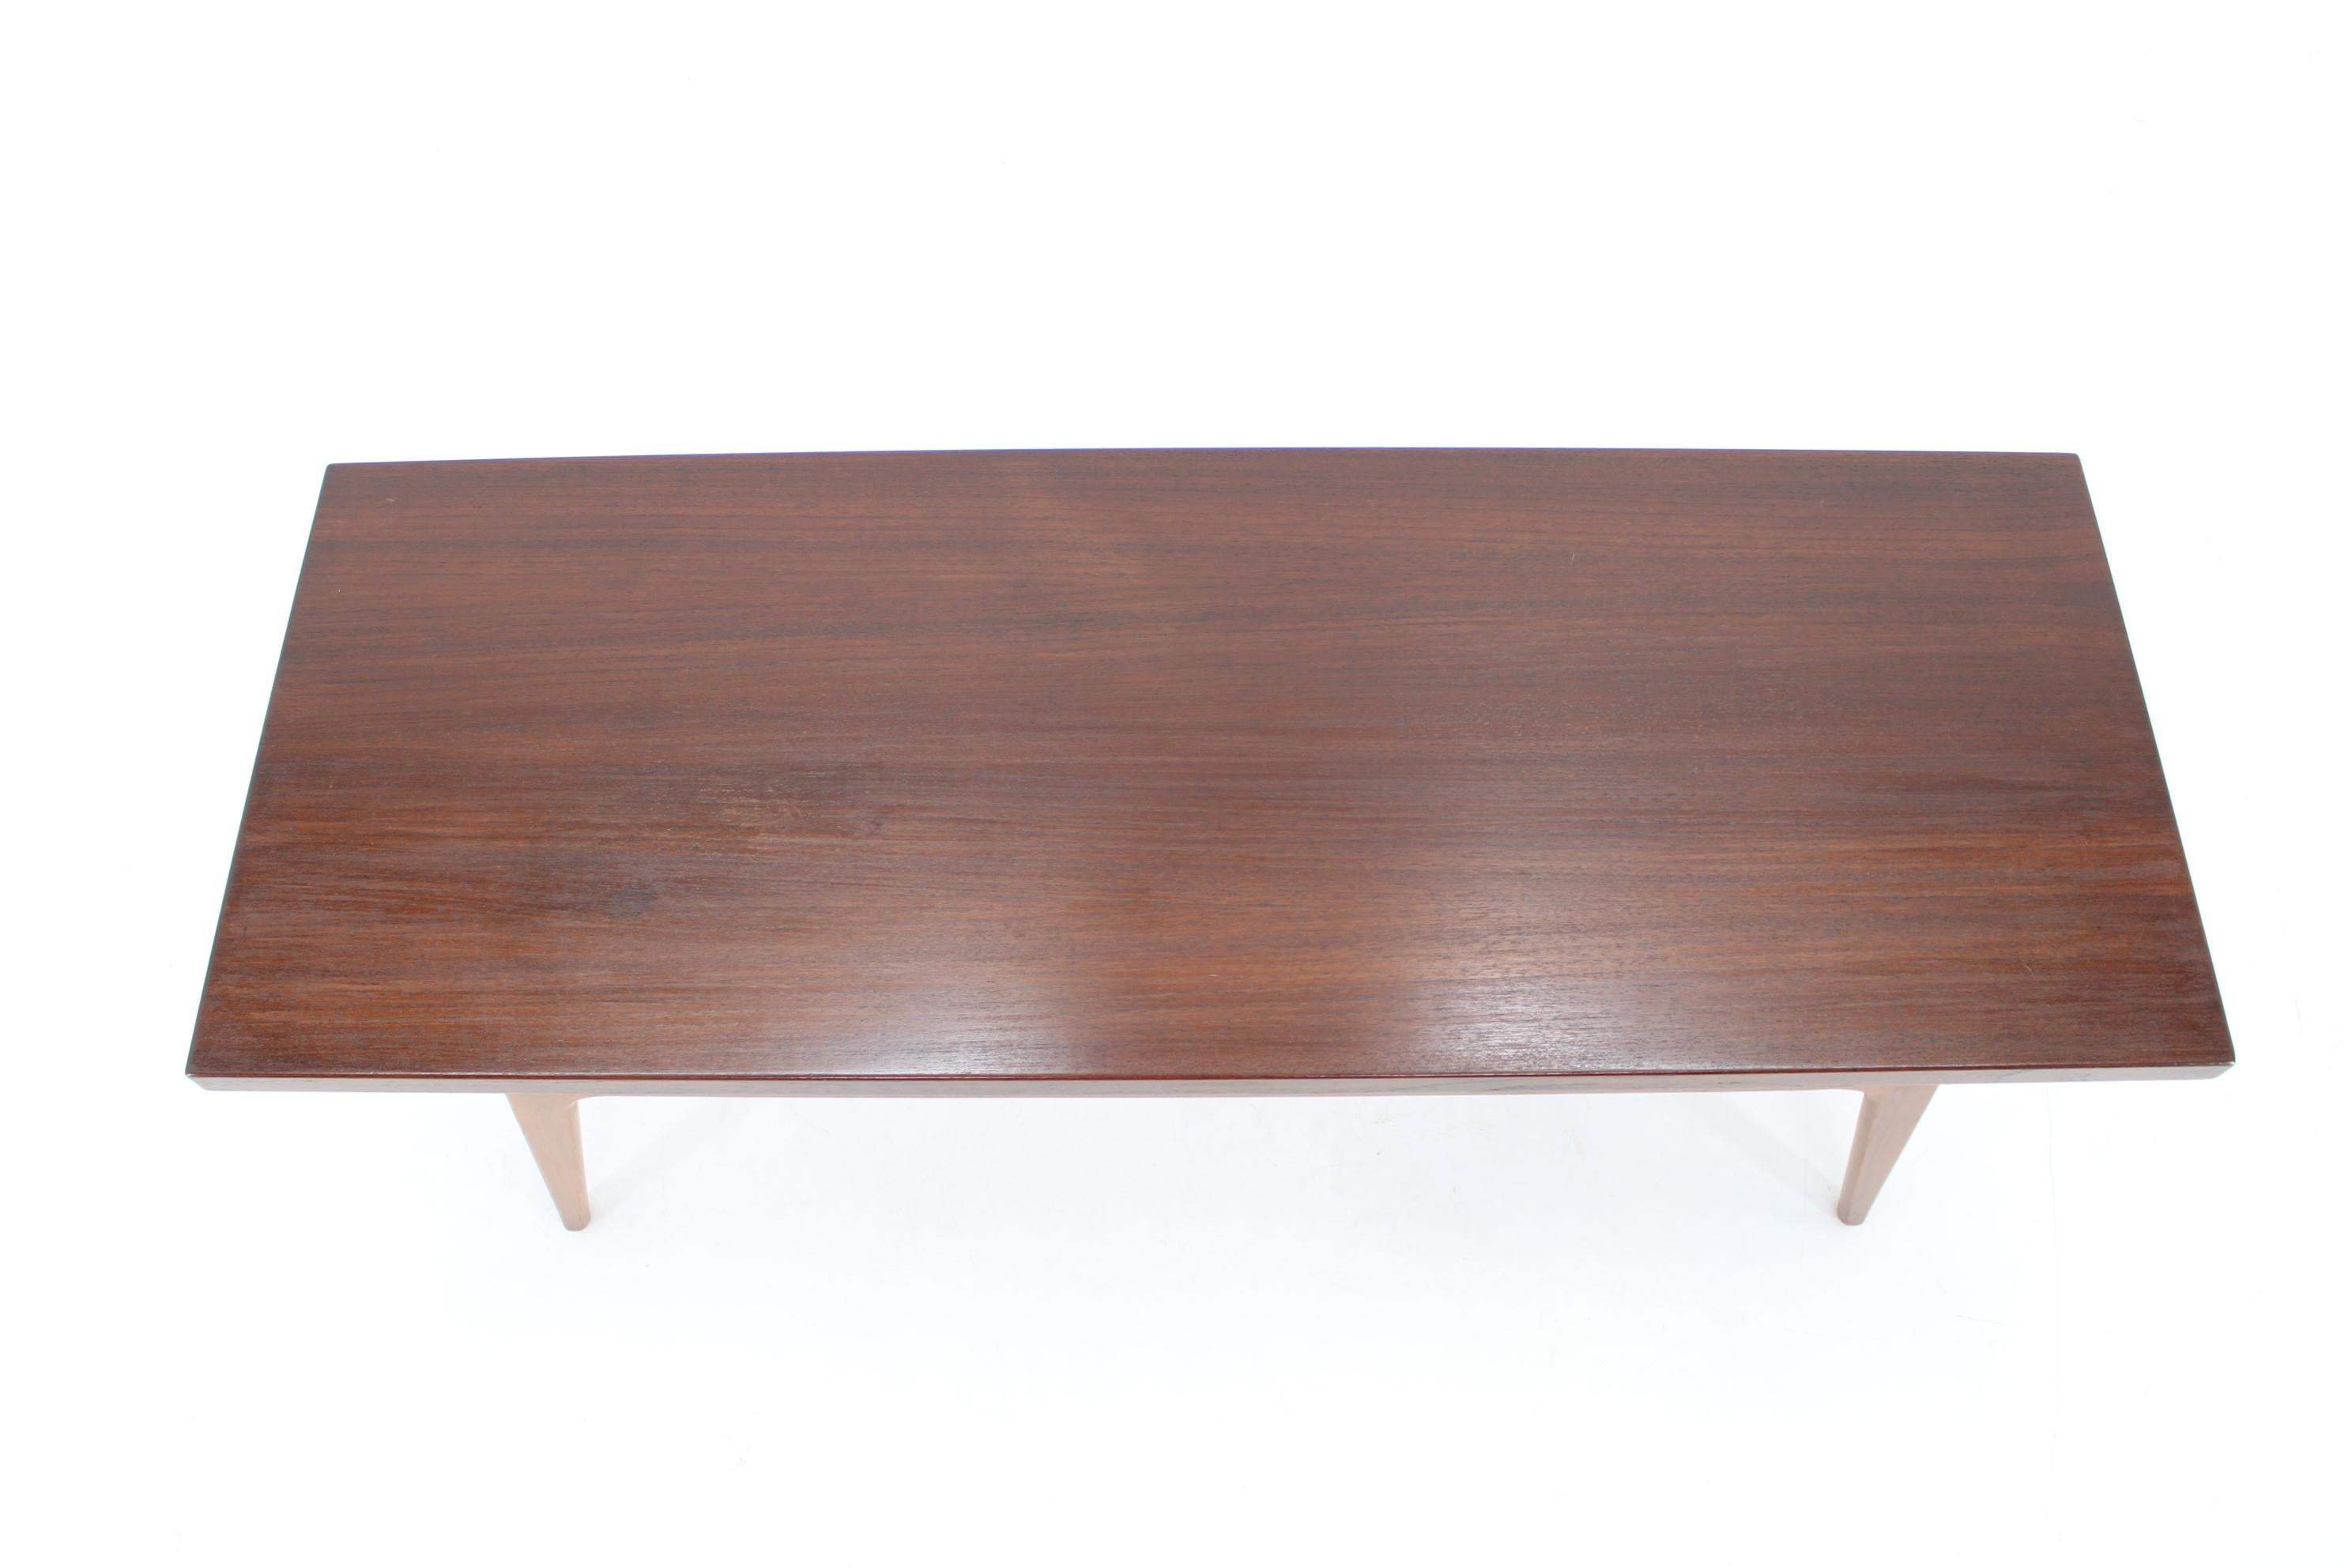 1960s Teak Coffee Table by Clausen and Son for Silkeborg, Denmark  In Good Condition For Sale In Praha, CZ